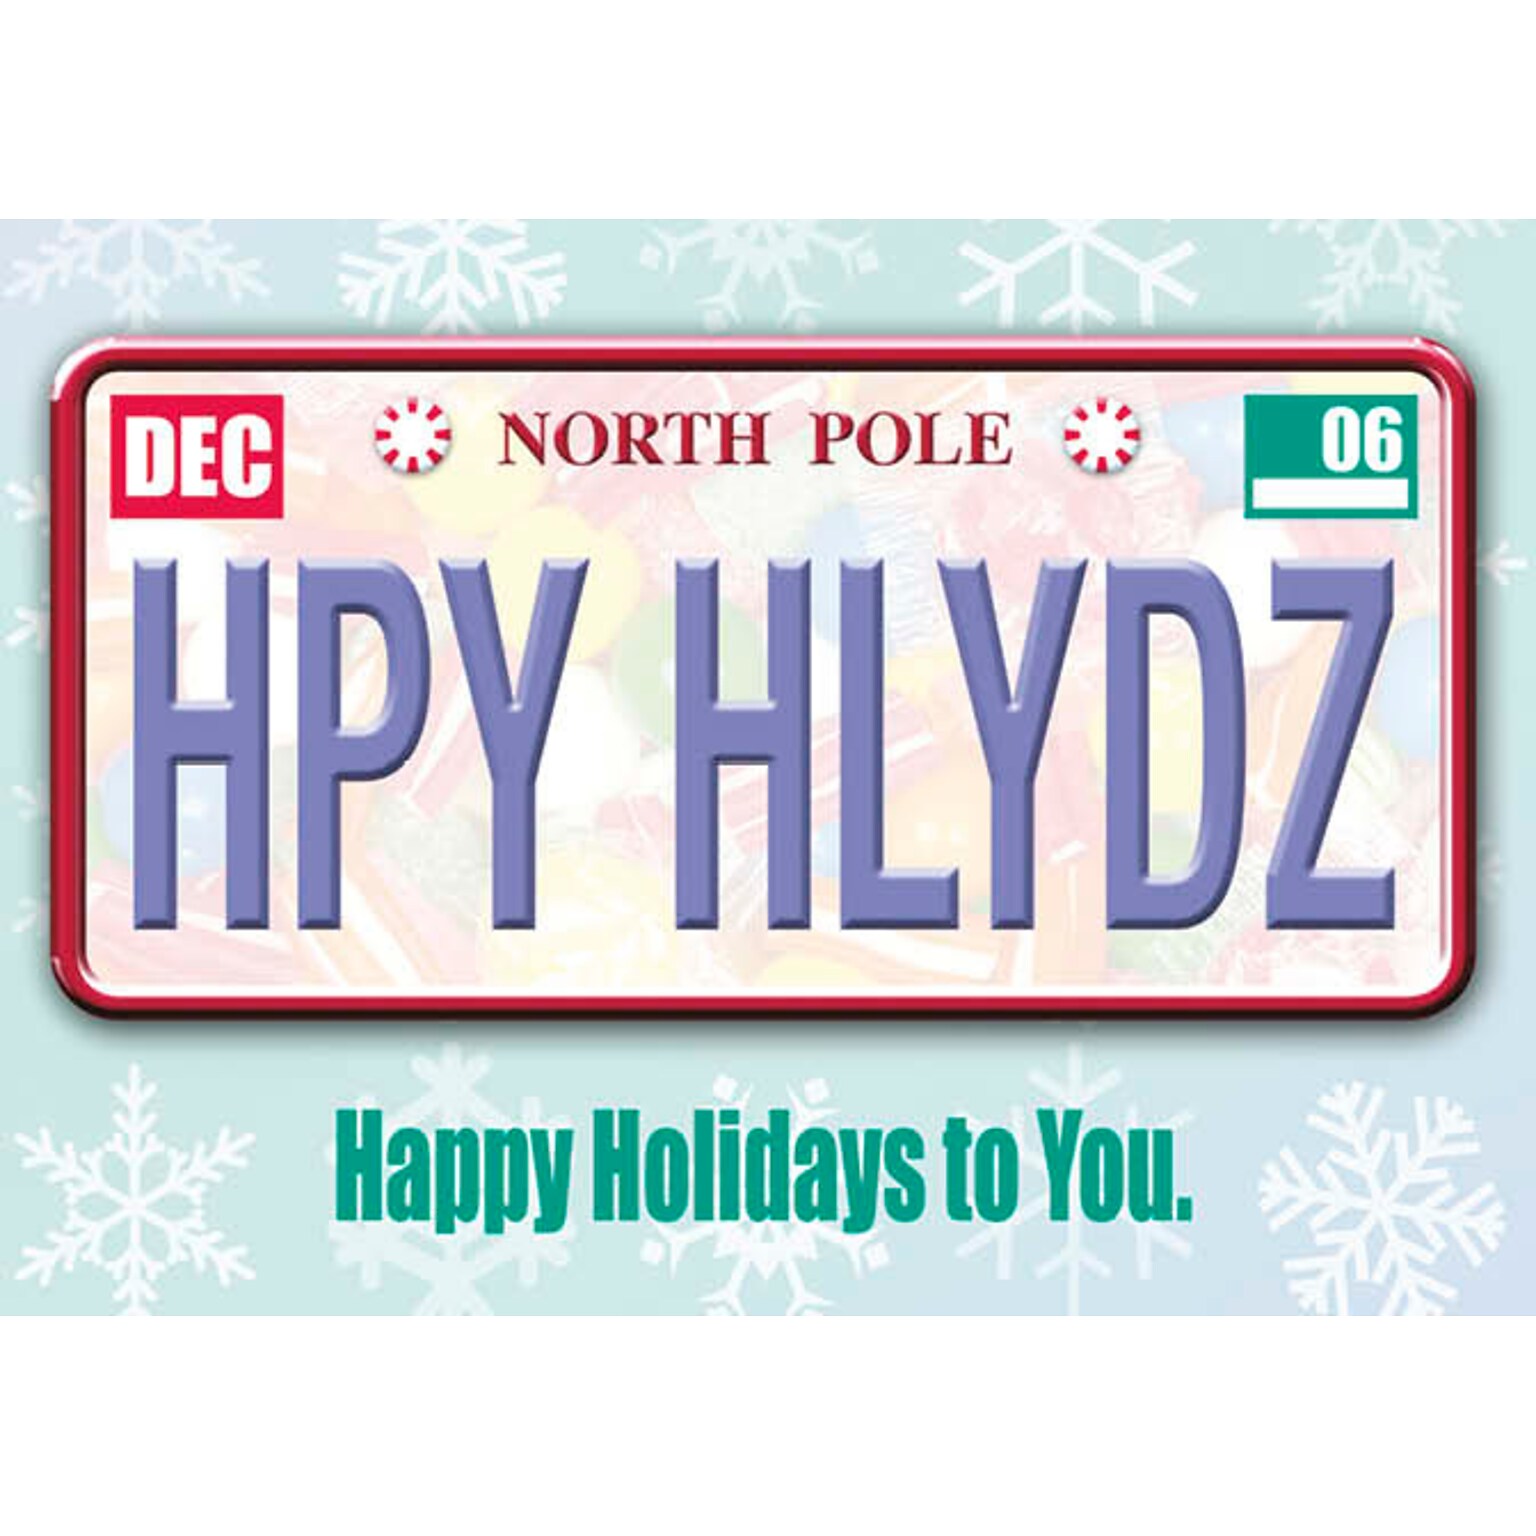 North Pole License Plate Holiday Greeting Cards, With A7 Envelopes, 7 x 5, 25 Cards per Set